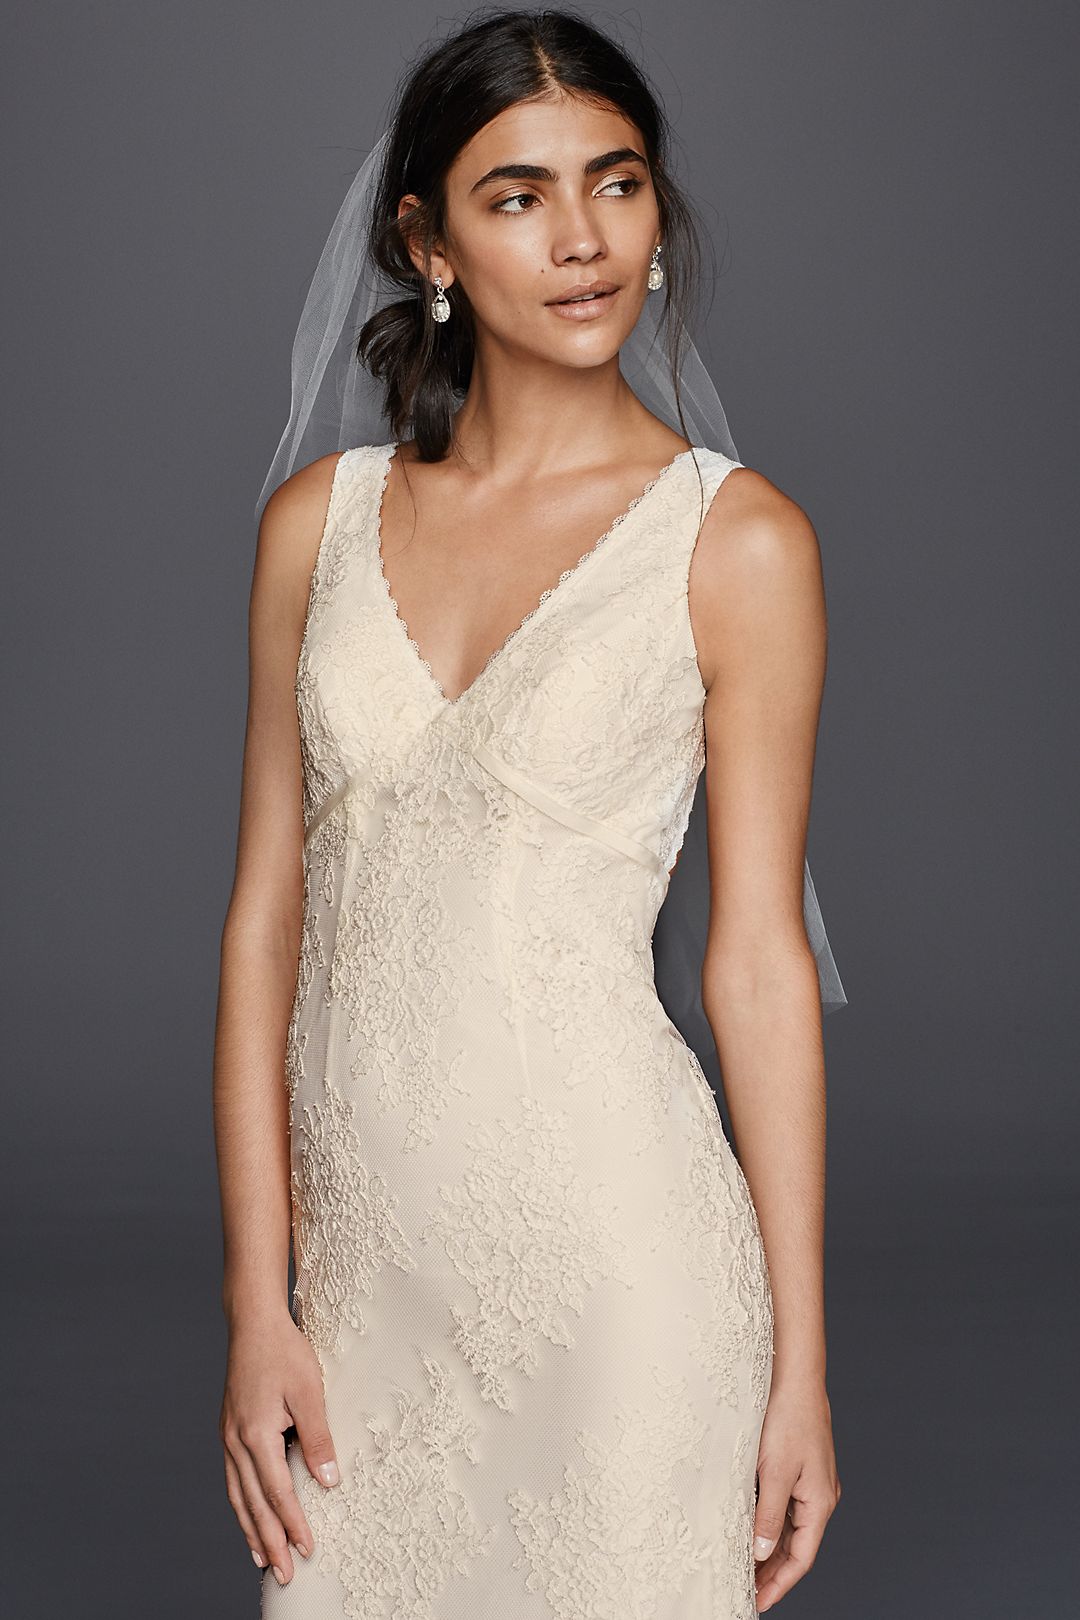 As-Is Floral Lace V-Neck Wedding Dress  Image 3